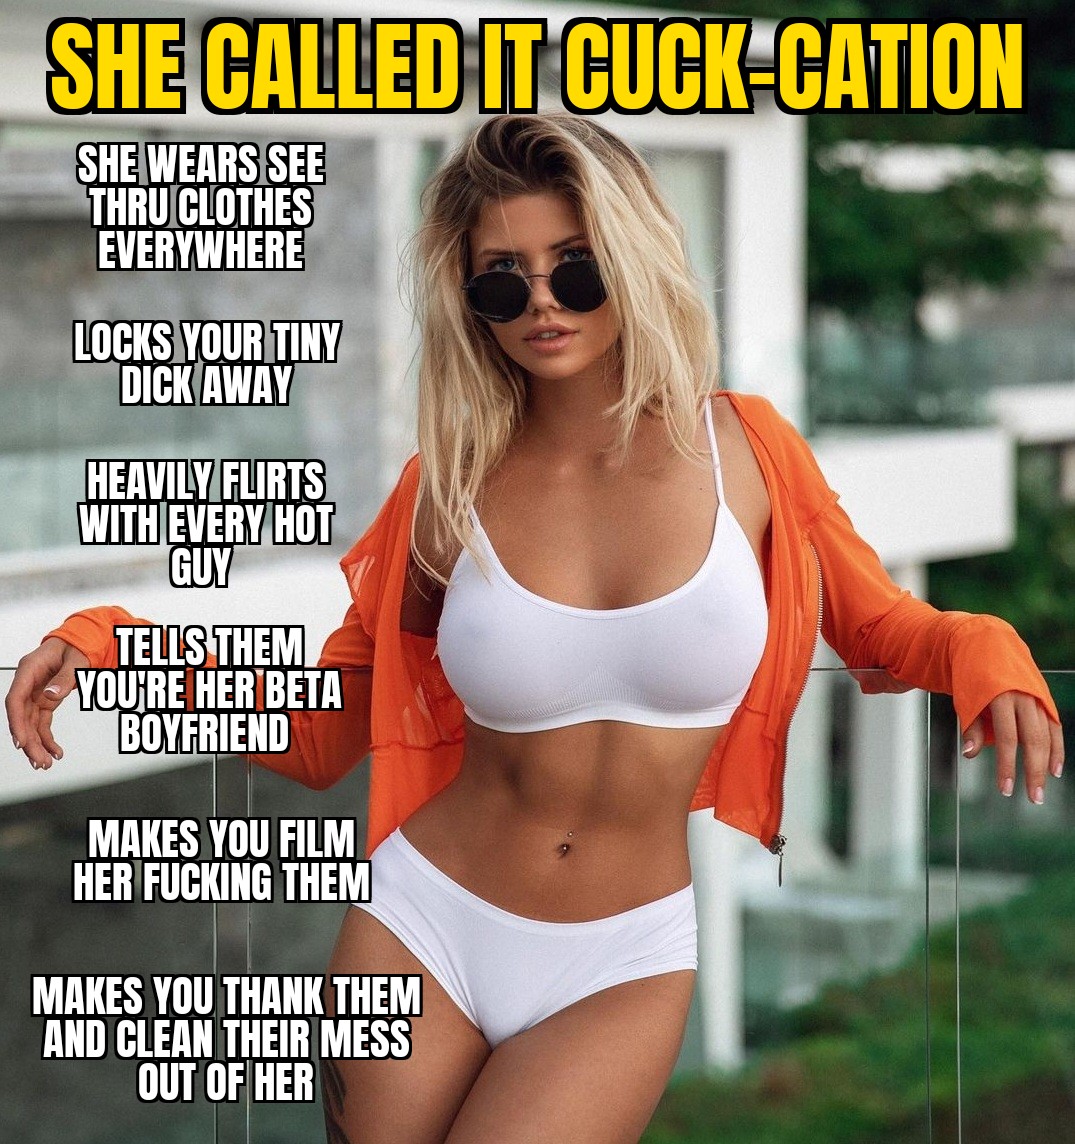 Hope youre ready for cuck-cation image image